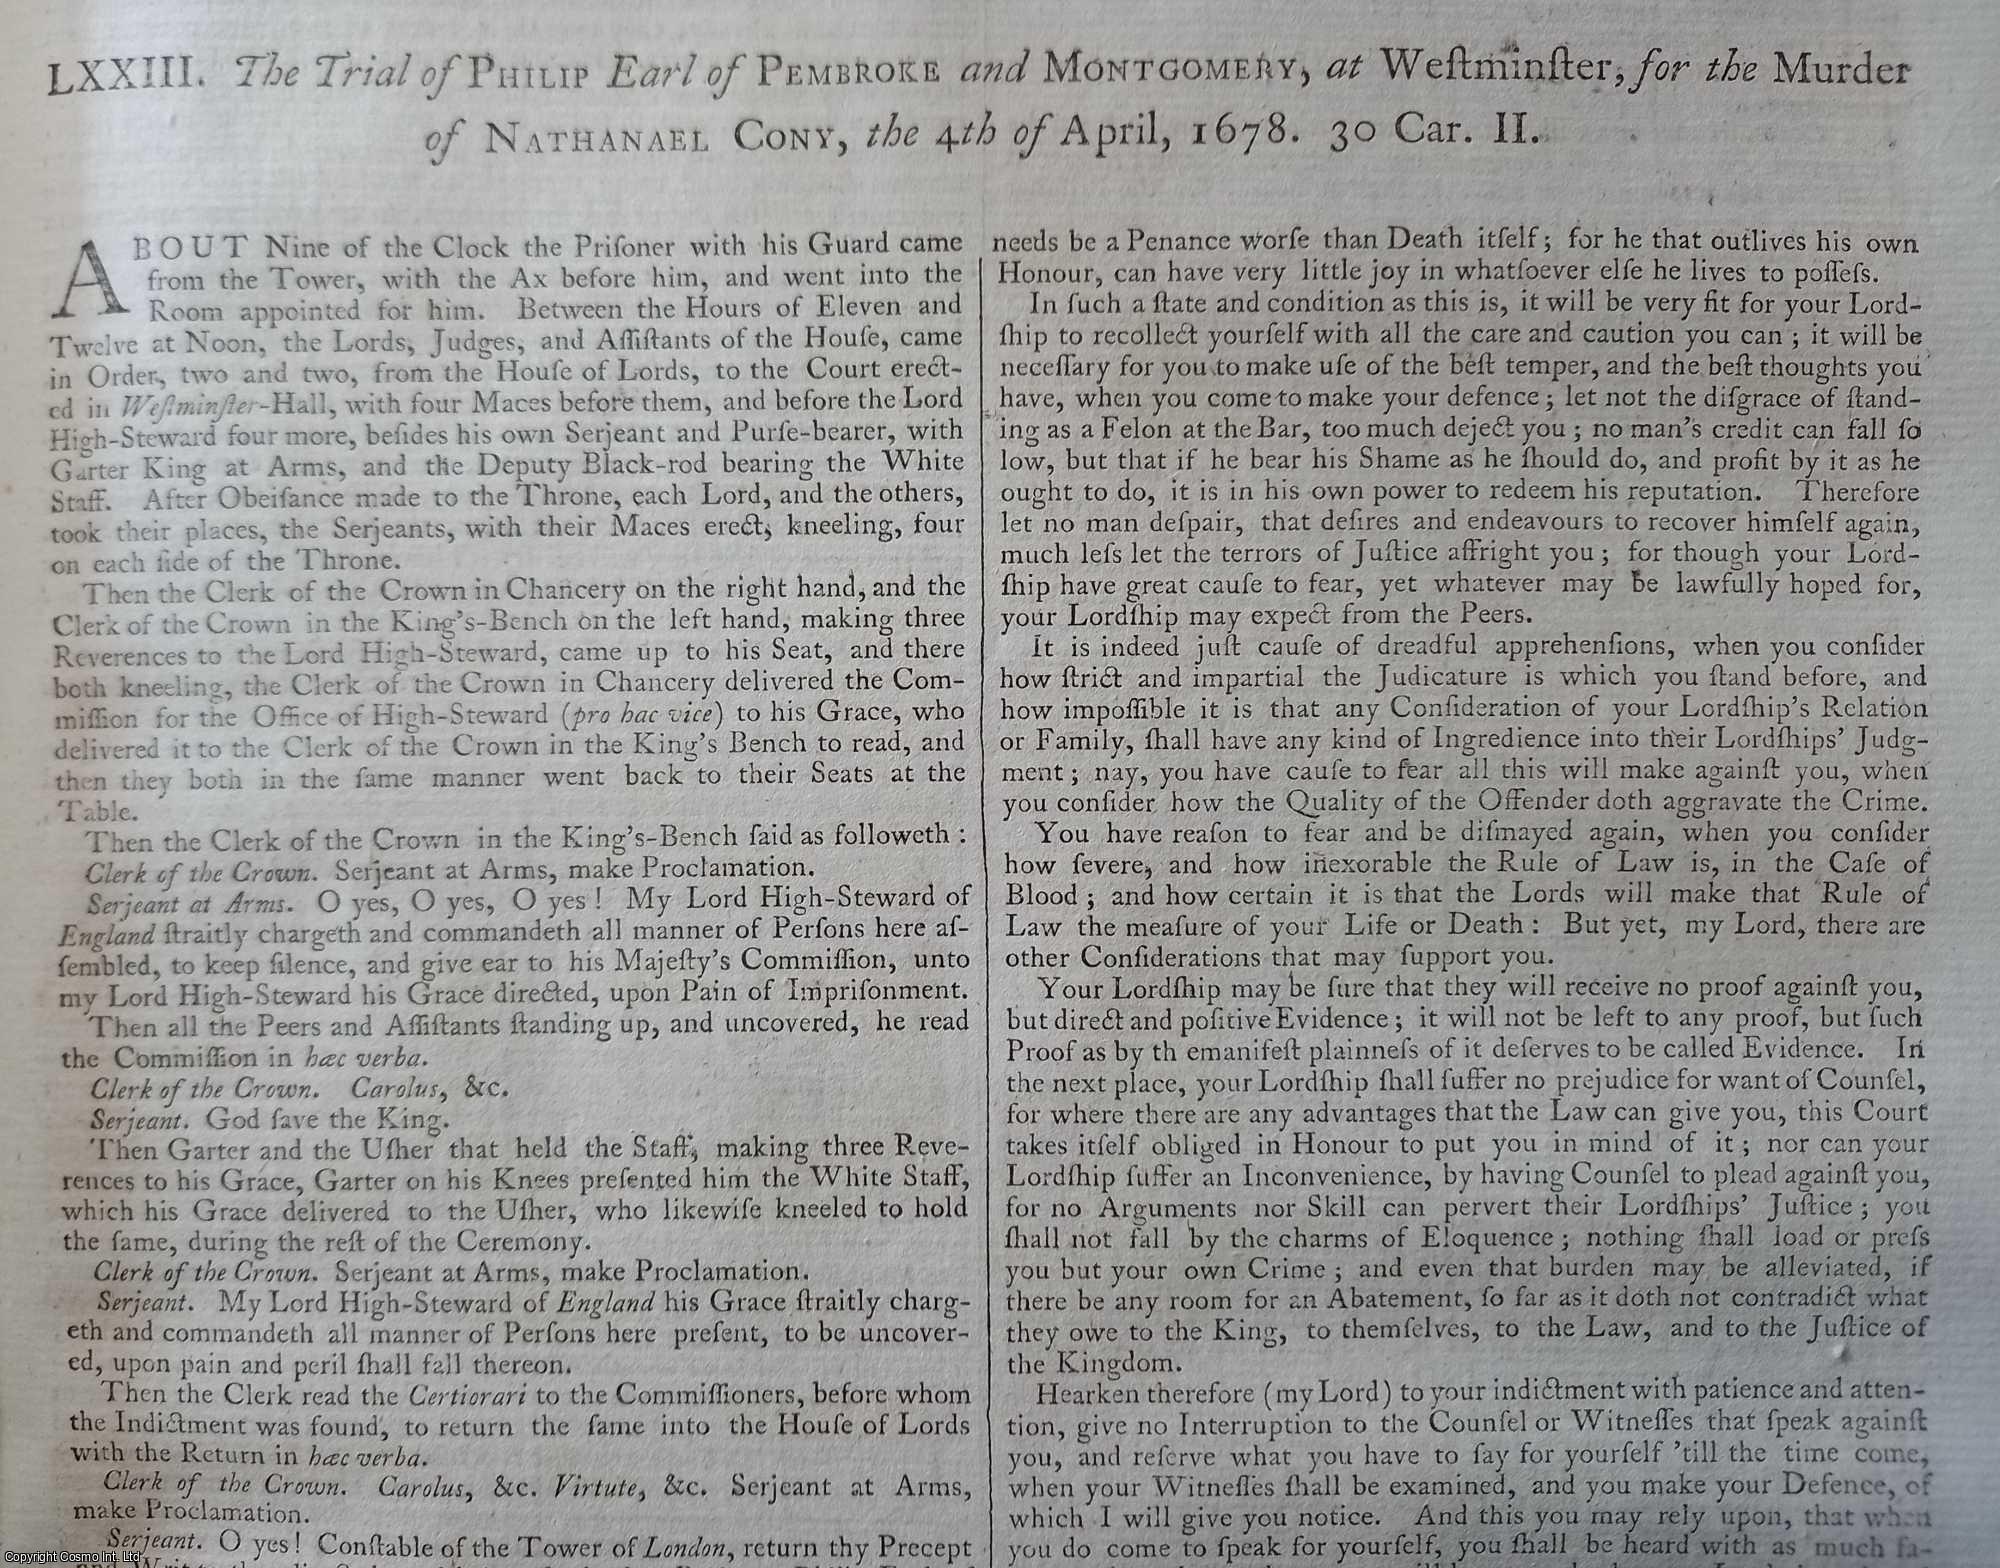 [Trial] - The Trial of Philip, Earl of Pembroke and Montgomery, at Westminster, for the Murder of Nathanael Cony, the 4th of April, 1678. An original article from the Collected State Trials.